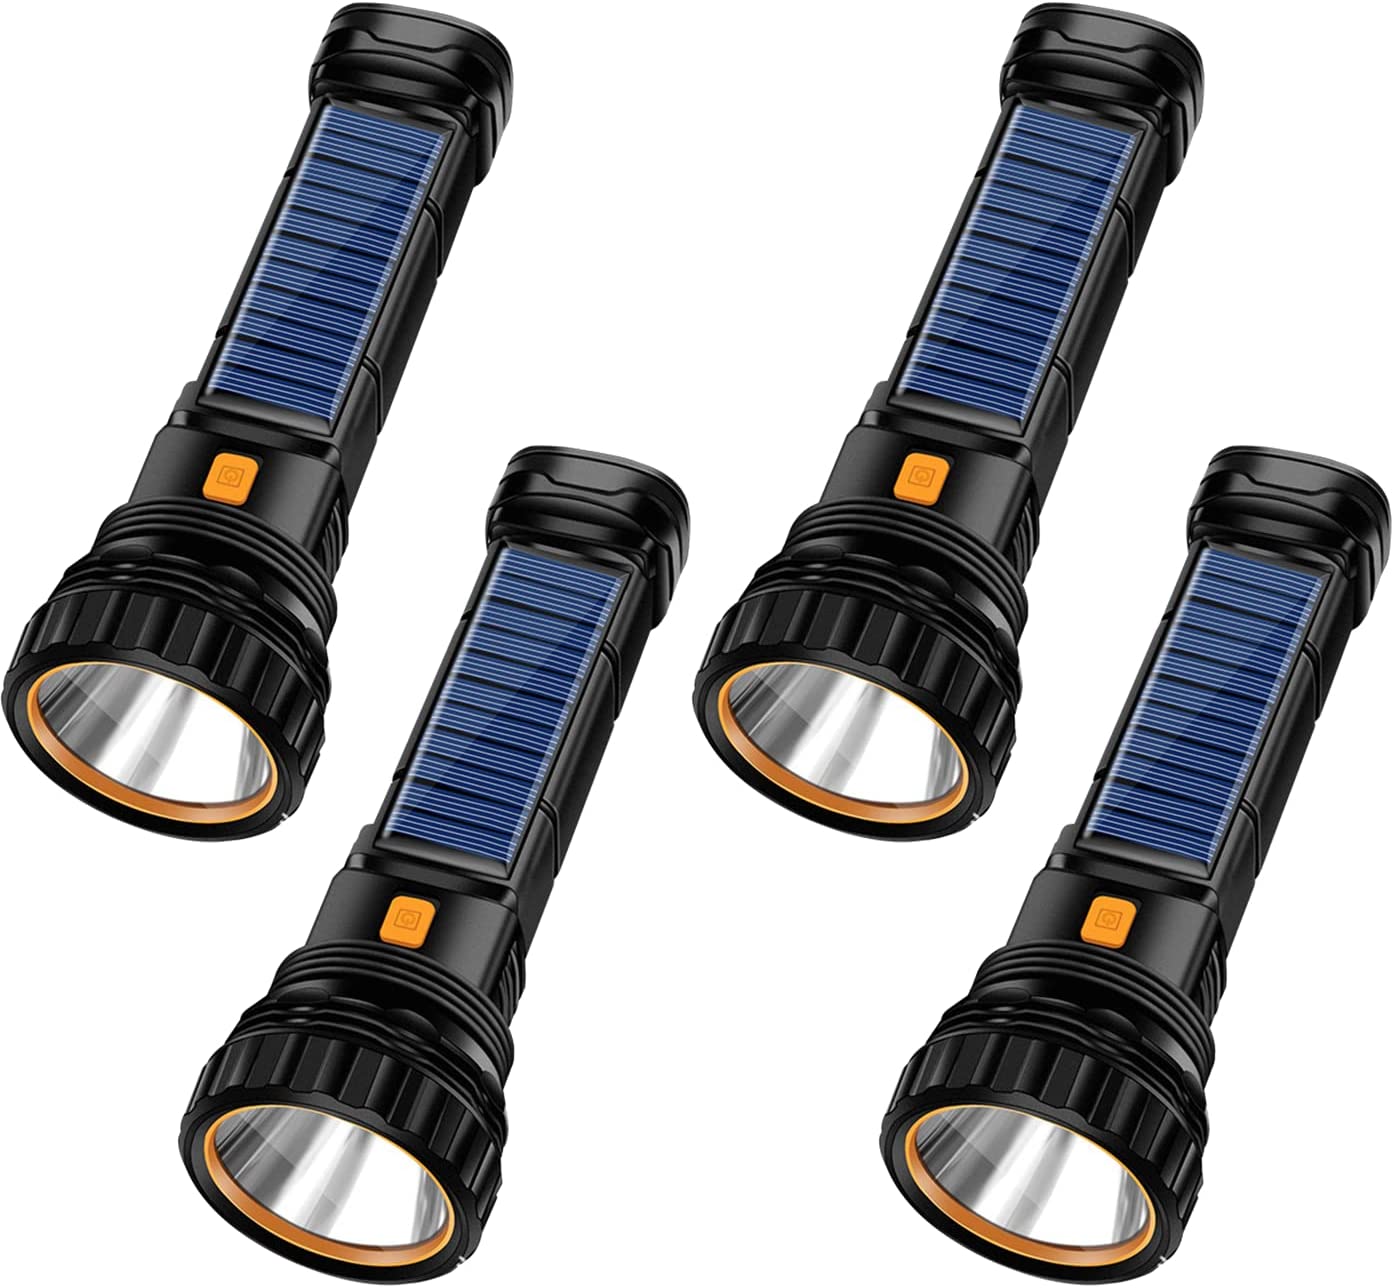 E-SHIDAI 4pcs Solar/Rechargeable Multi Function 1000 Lumens LED Flashlight, with Emergency Strobe Light and 1200 Mah Battery, Emergency Power Supply and USB Charging Cable, Fast Charging (4PC)